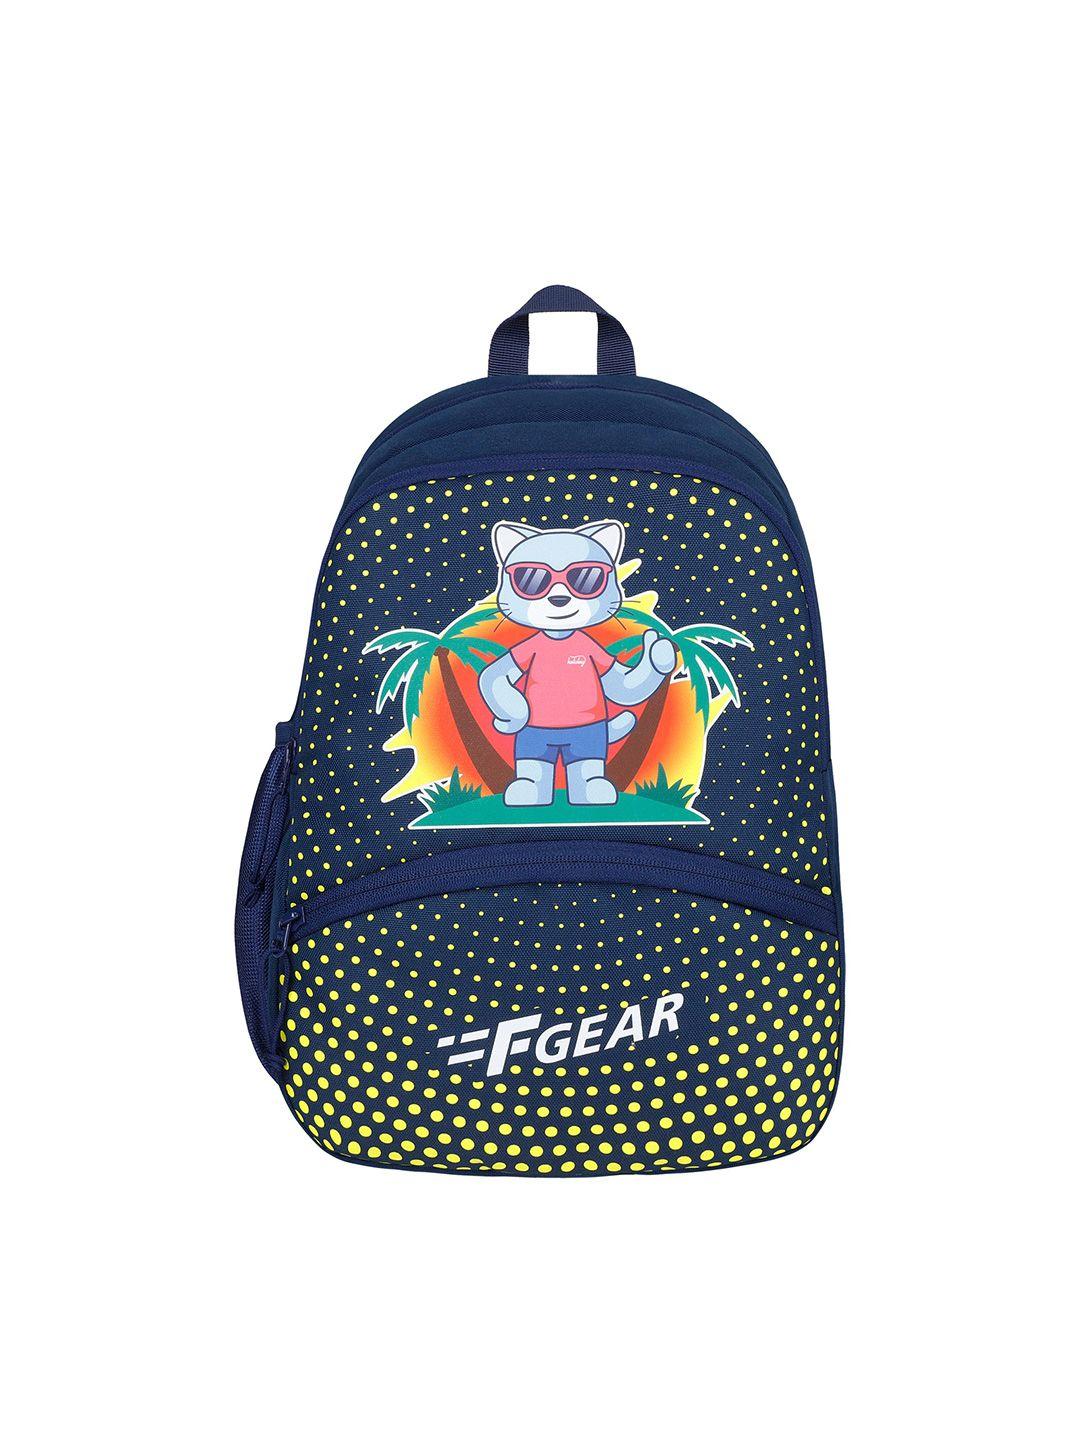 f gear kids graphic printed water resistant backpack